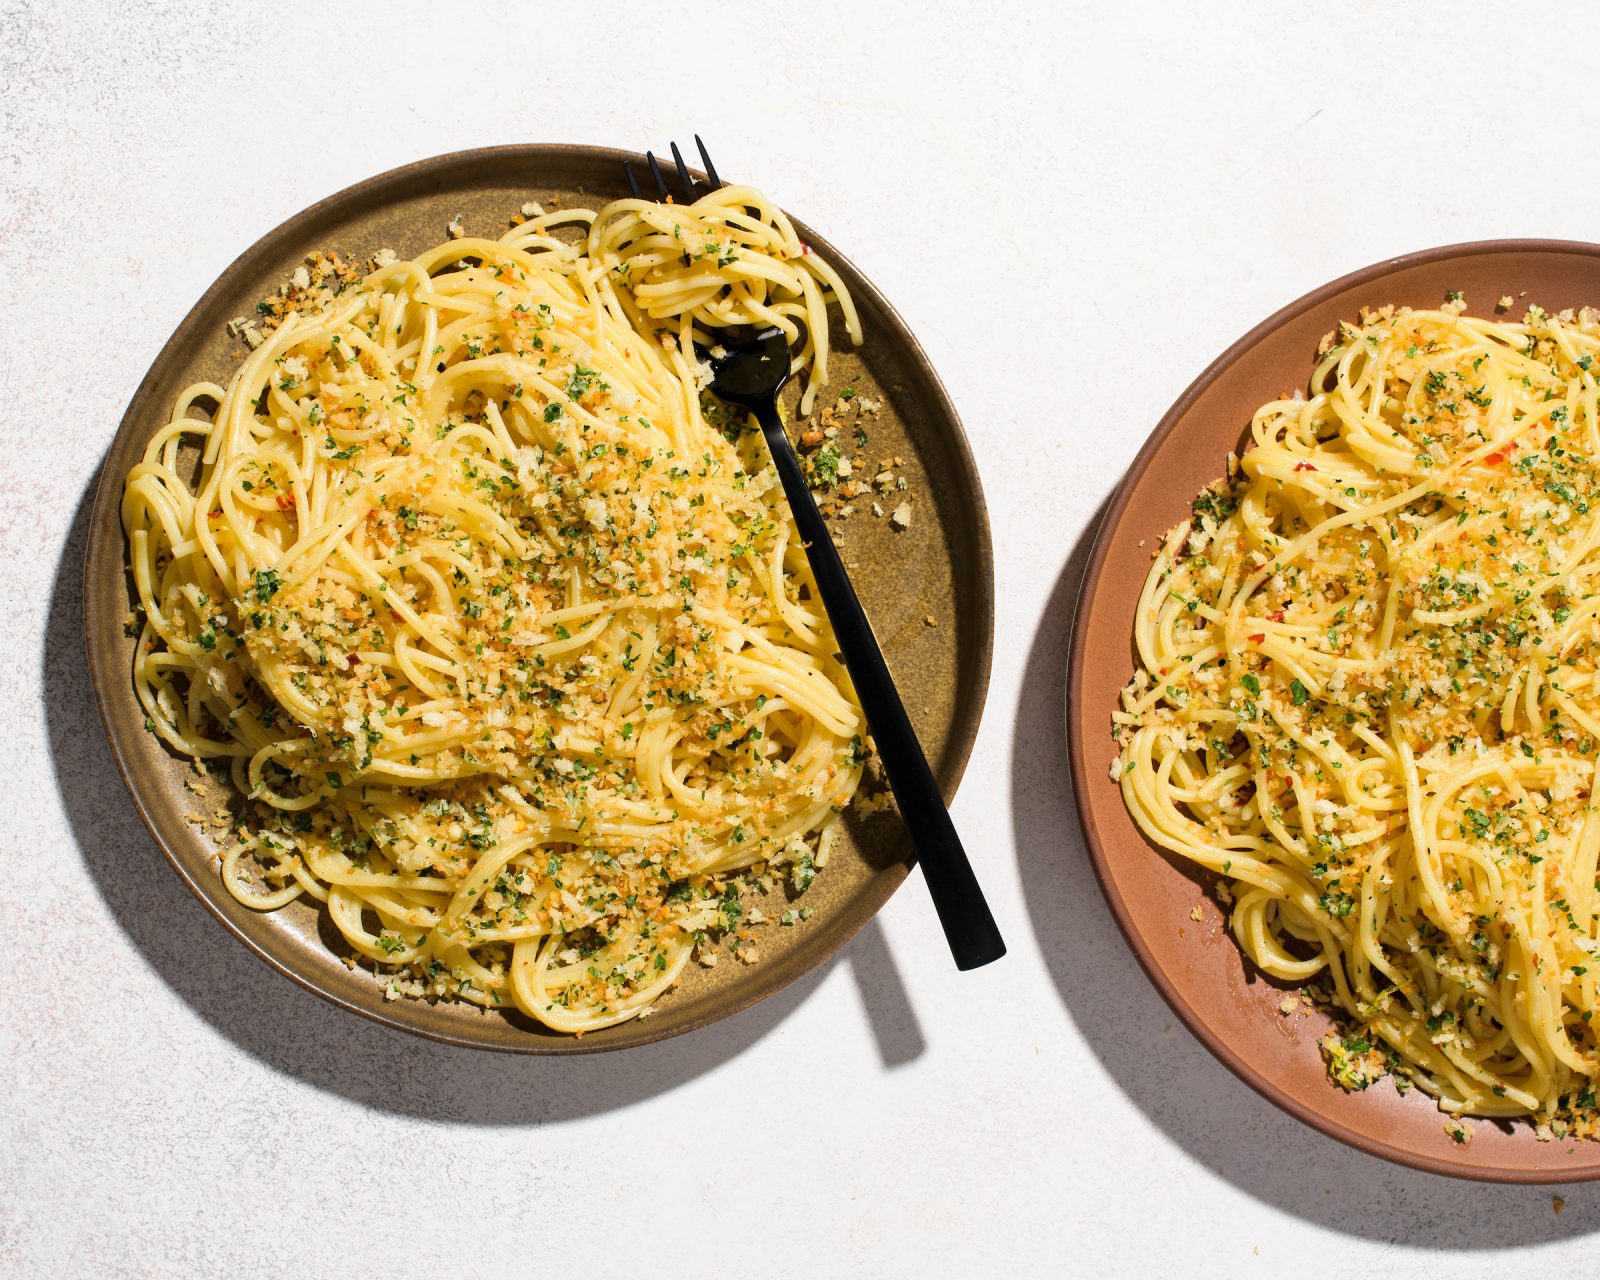 Spaghetti with Garlic Oil and Lemon Parmesan Breadcrumbs Cook What You Have Milk Street